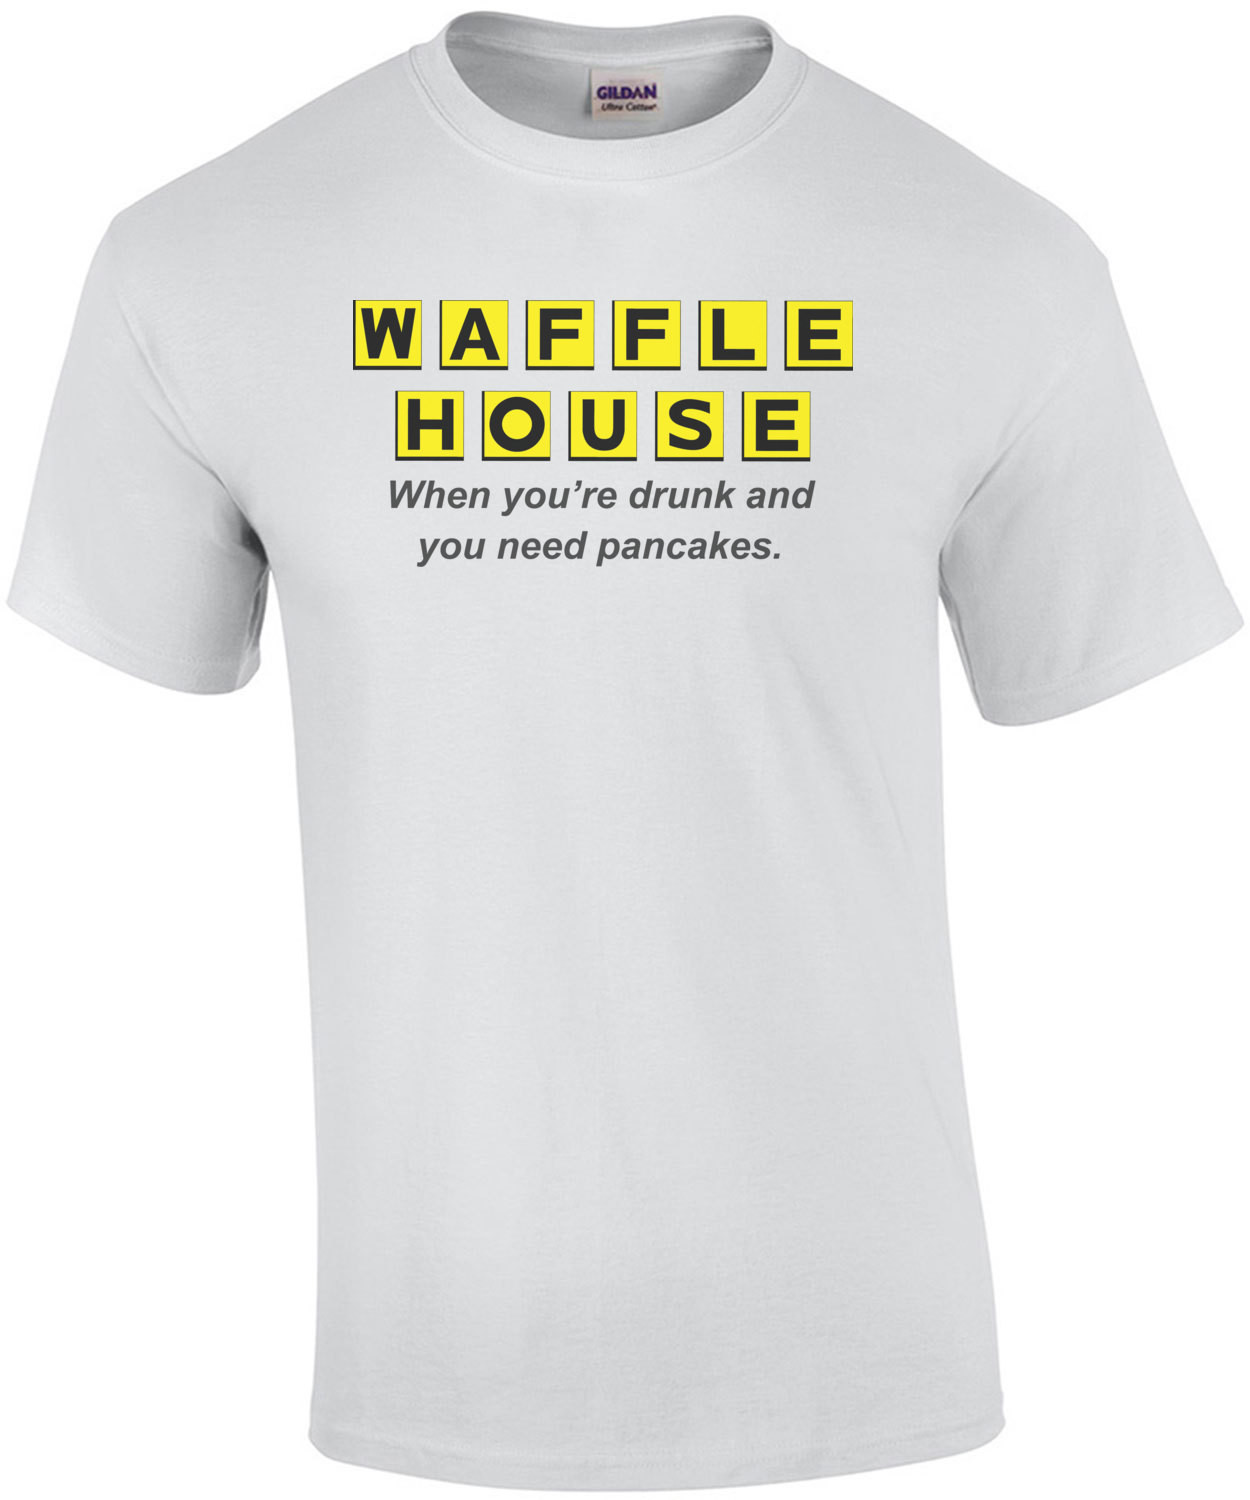 Waffle House When You're Drunk And Need Pancakes T-Shirt